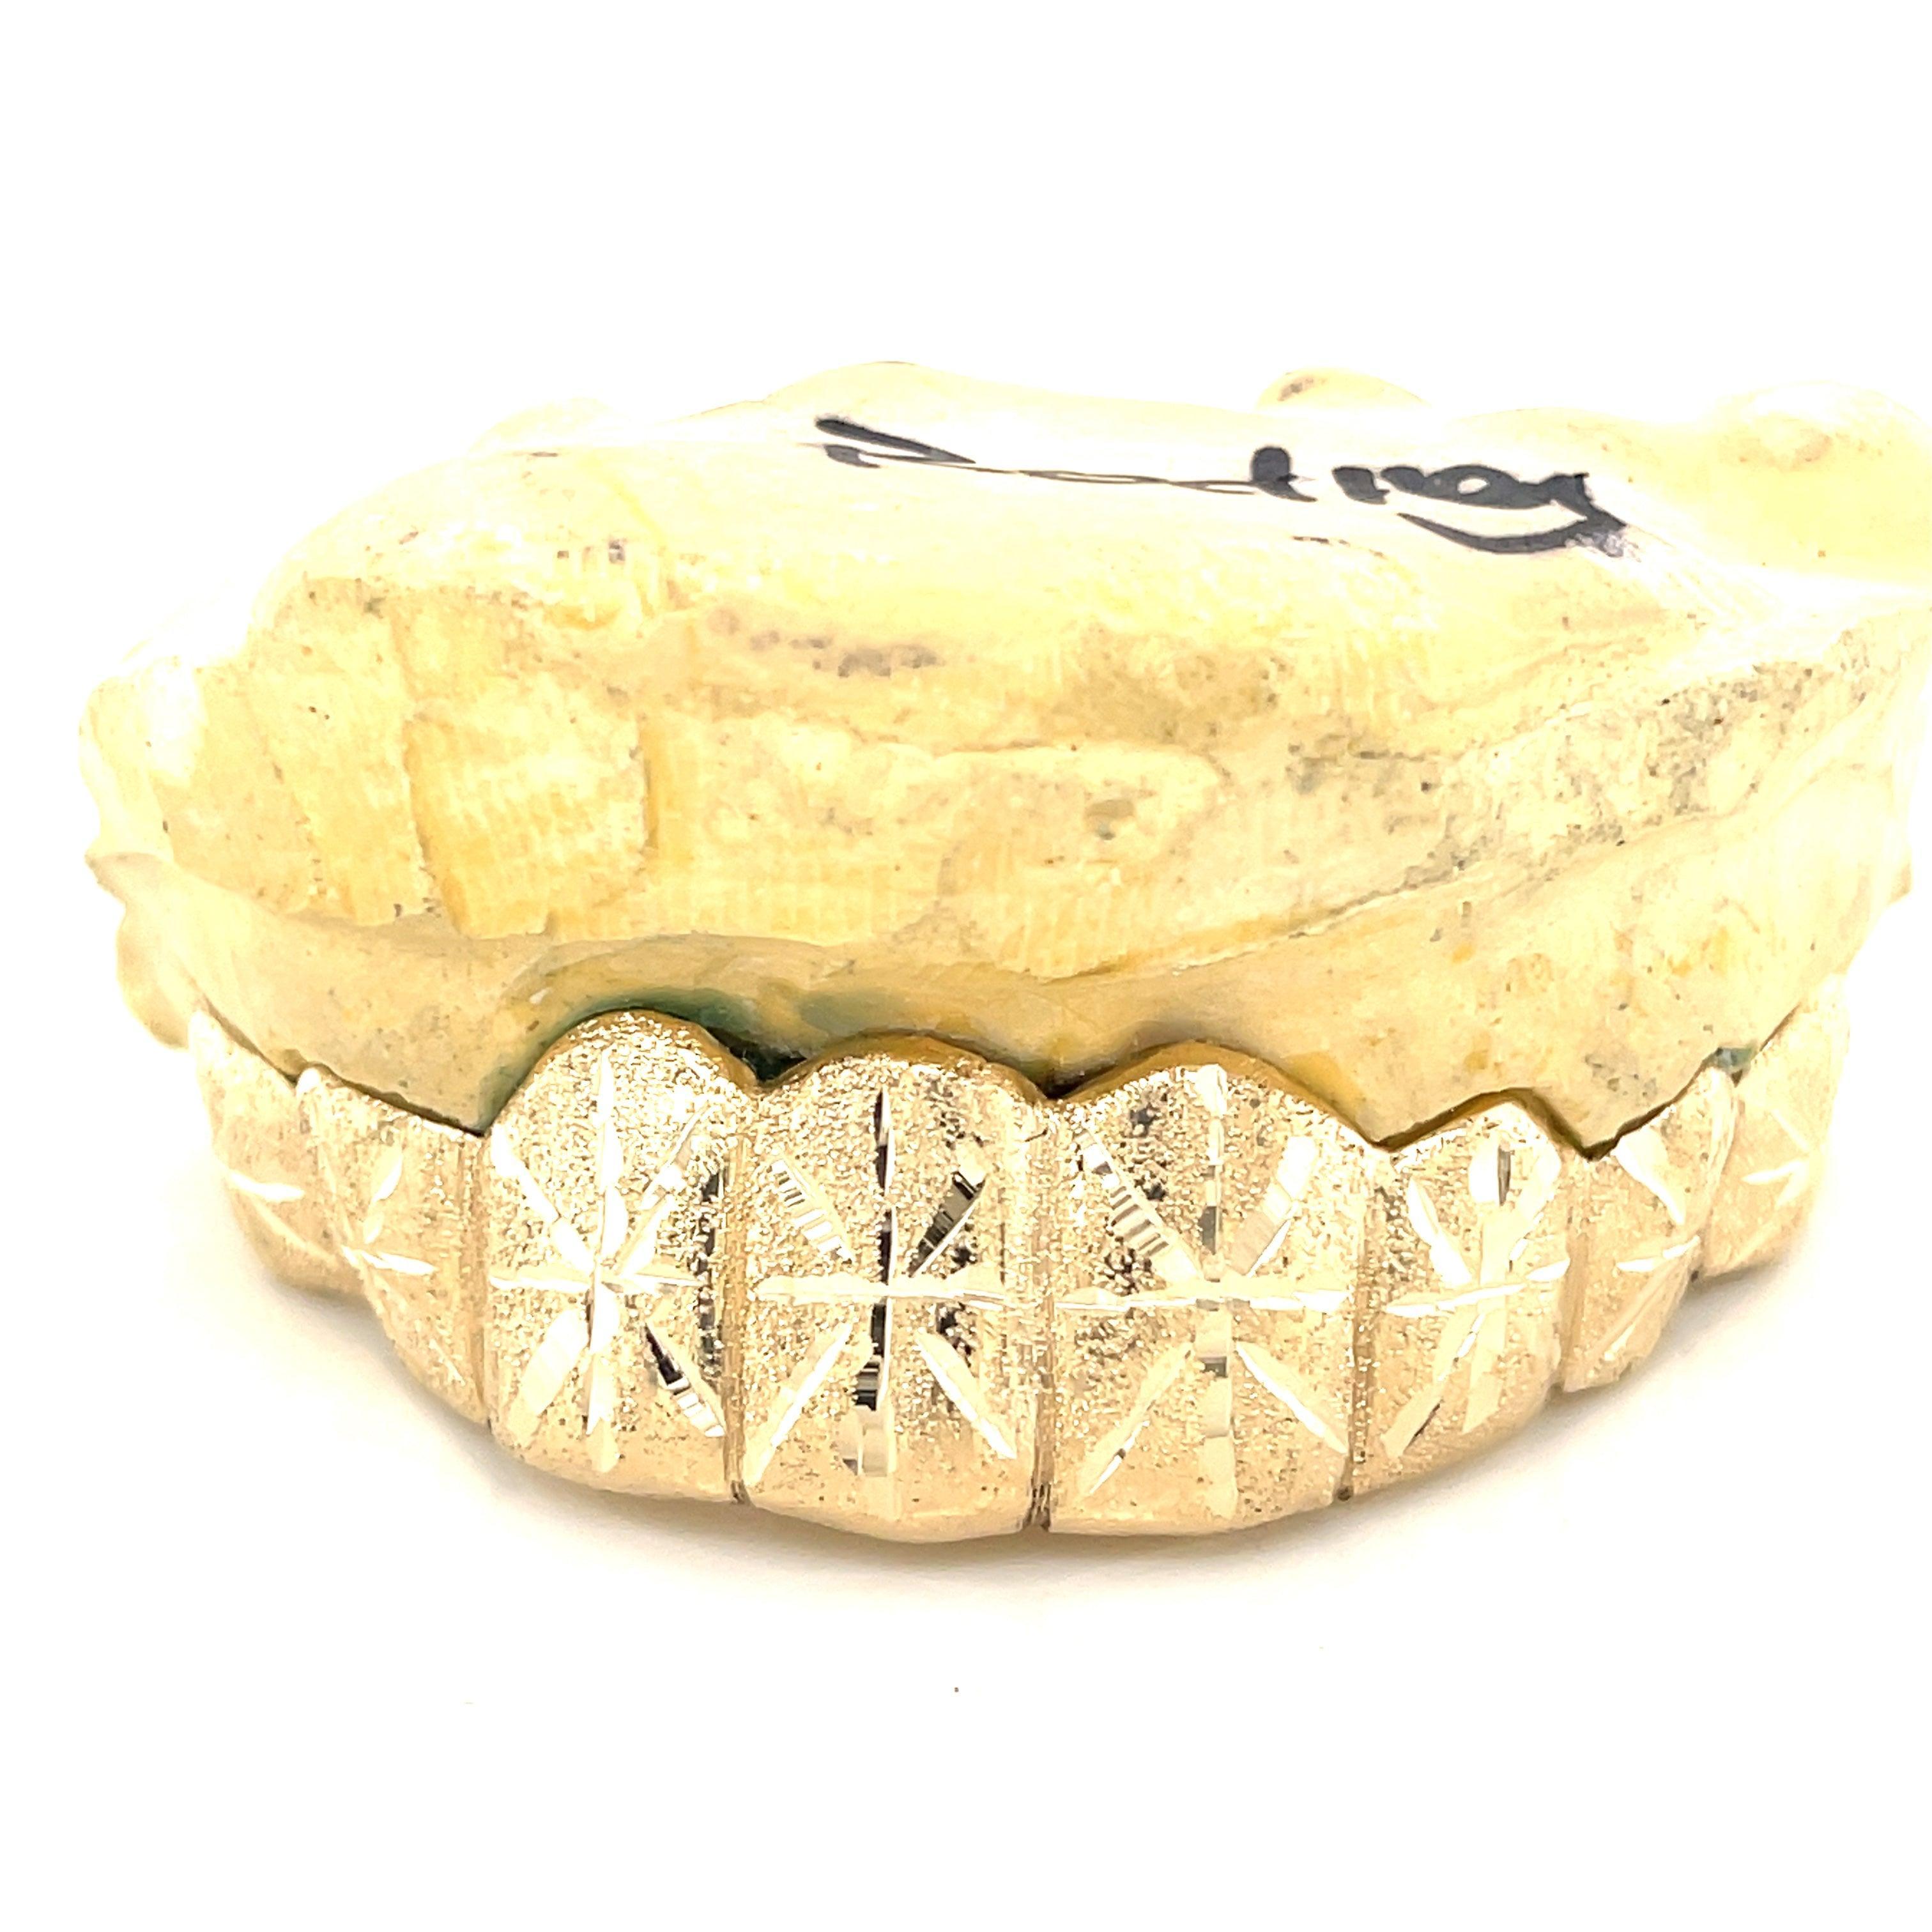 8pc Gold Snowfall Top Grillz - Seattle Gold Grillz